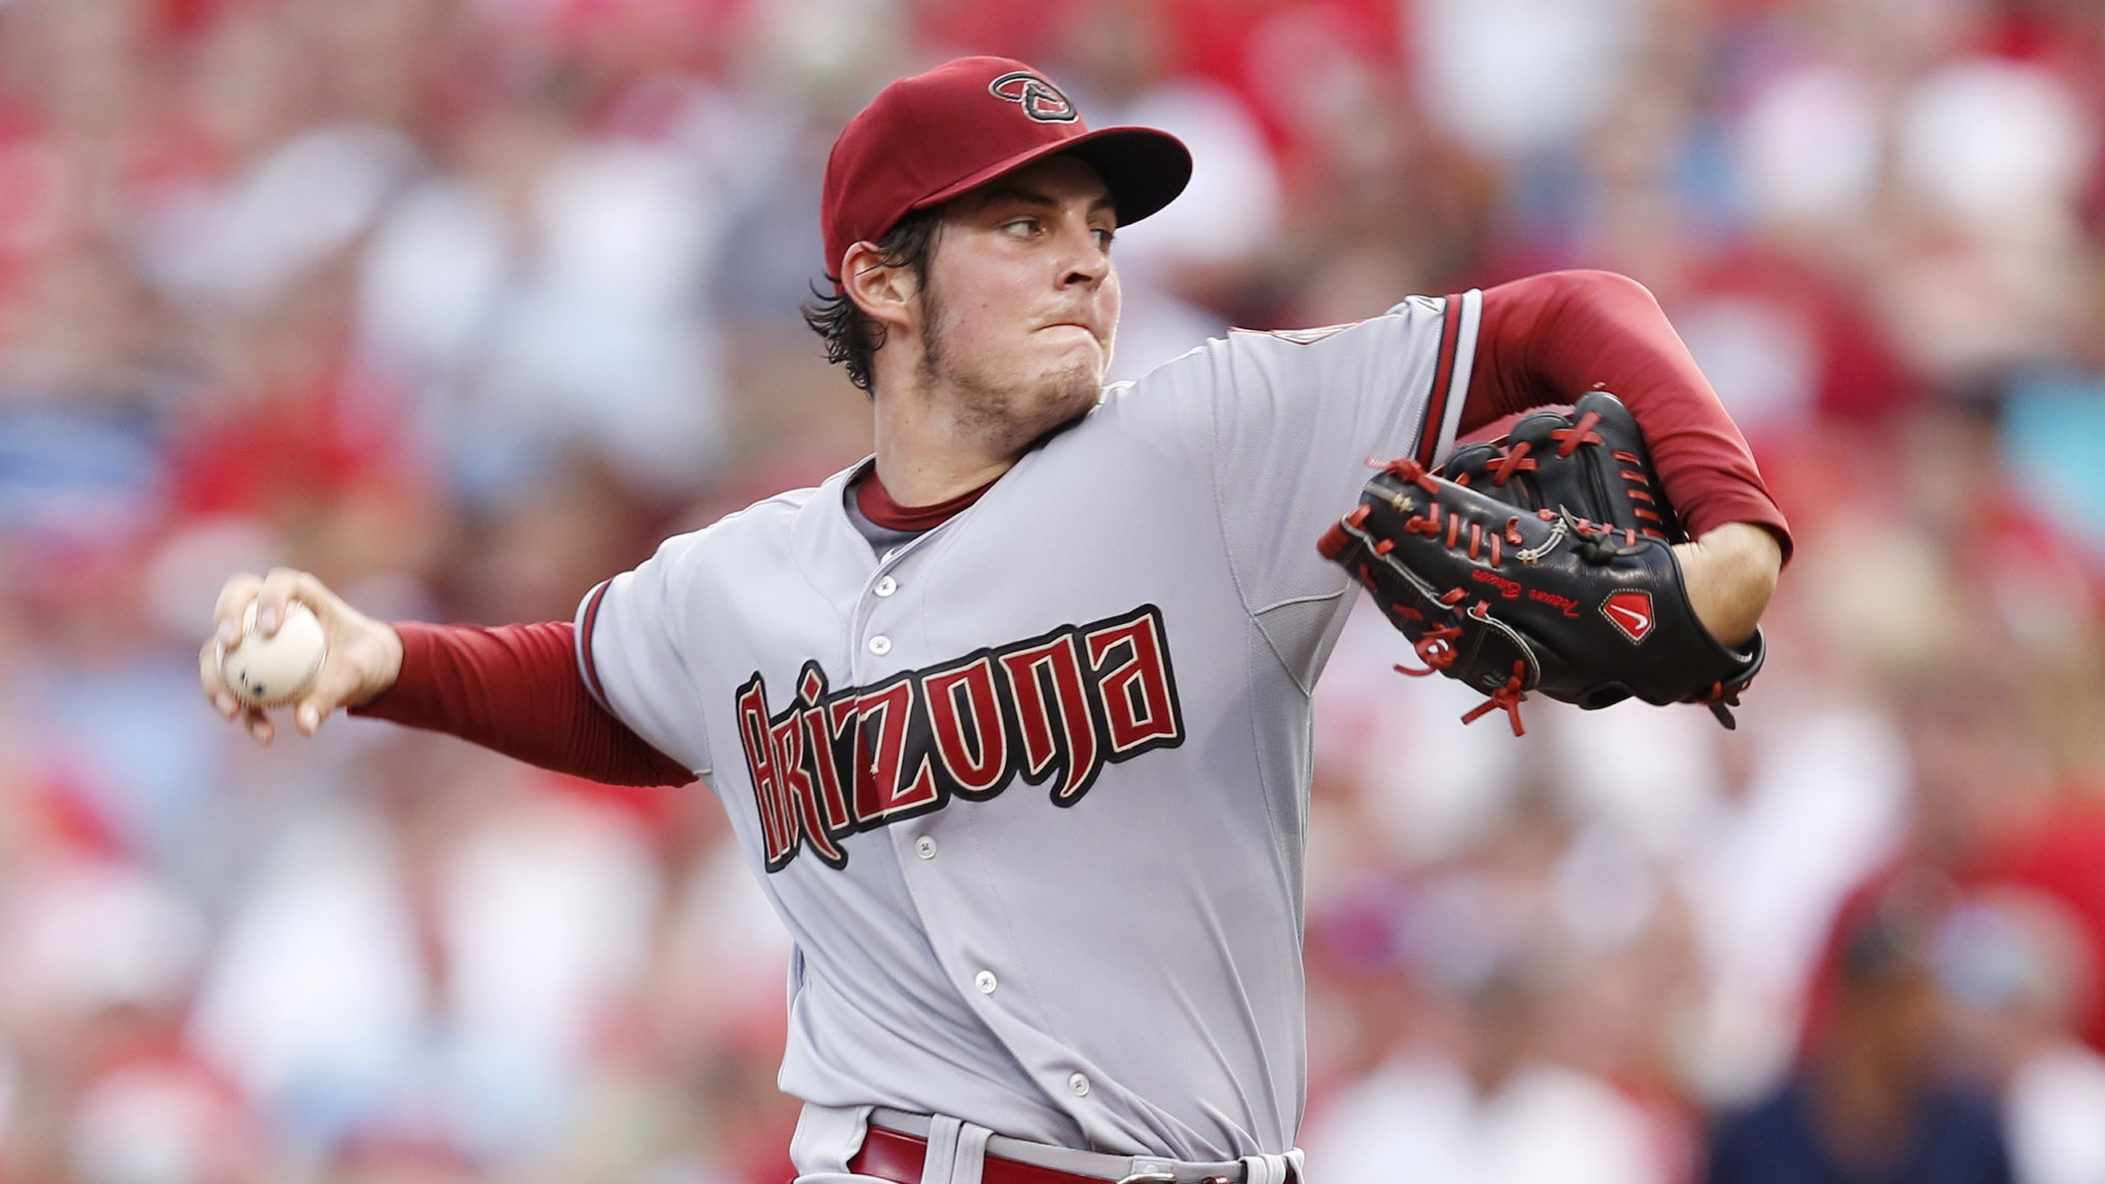 Trevor Bauer #17 of the Arizona Diamondbacks pitches during the game against the Cincinnati Reds at...